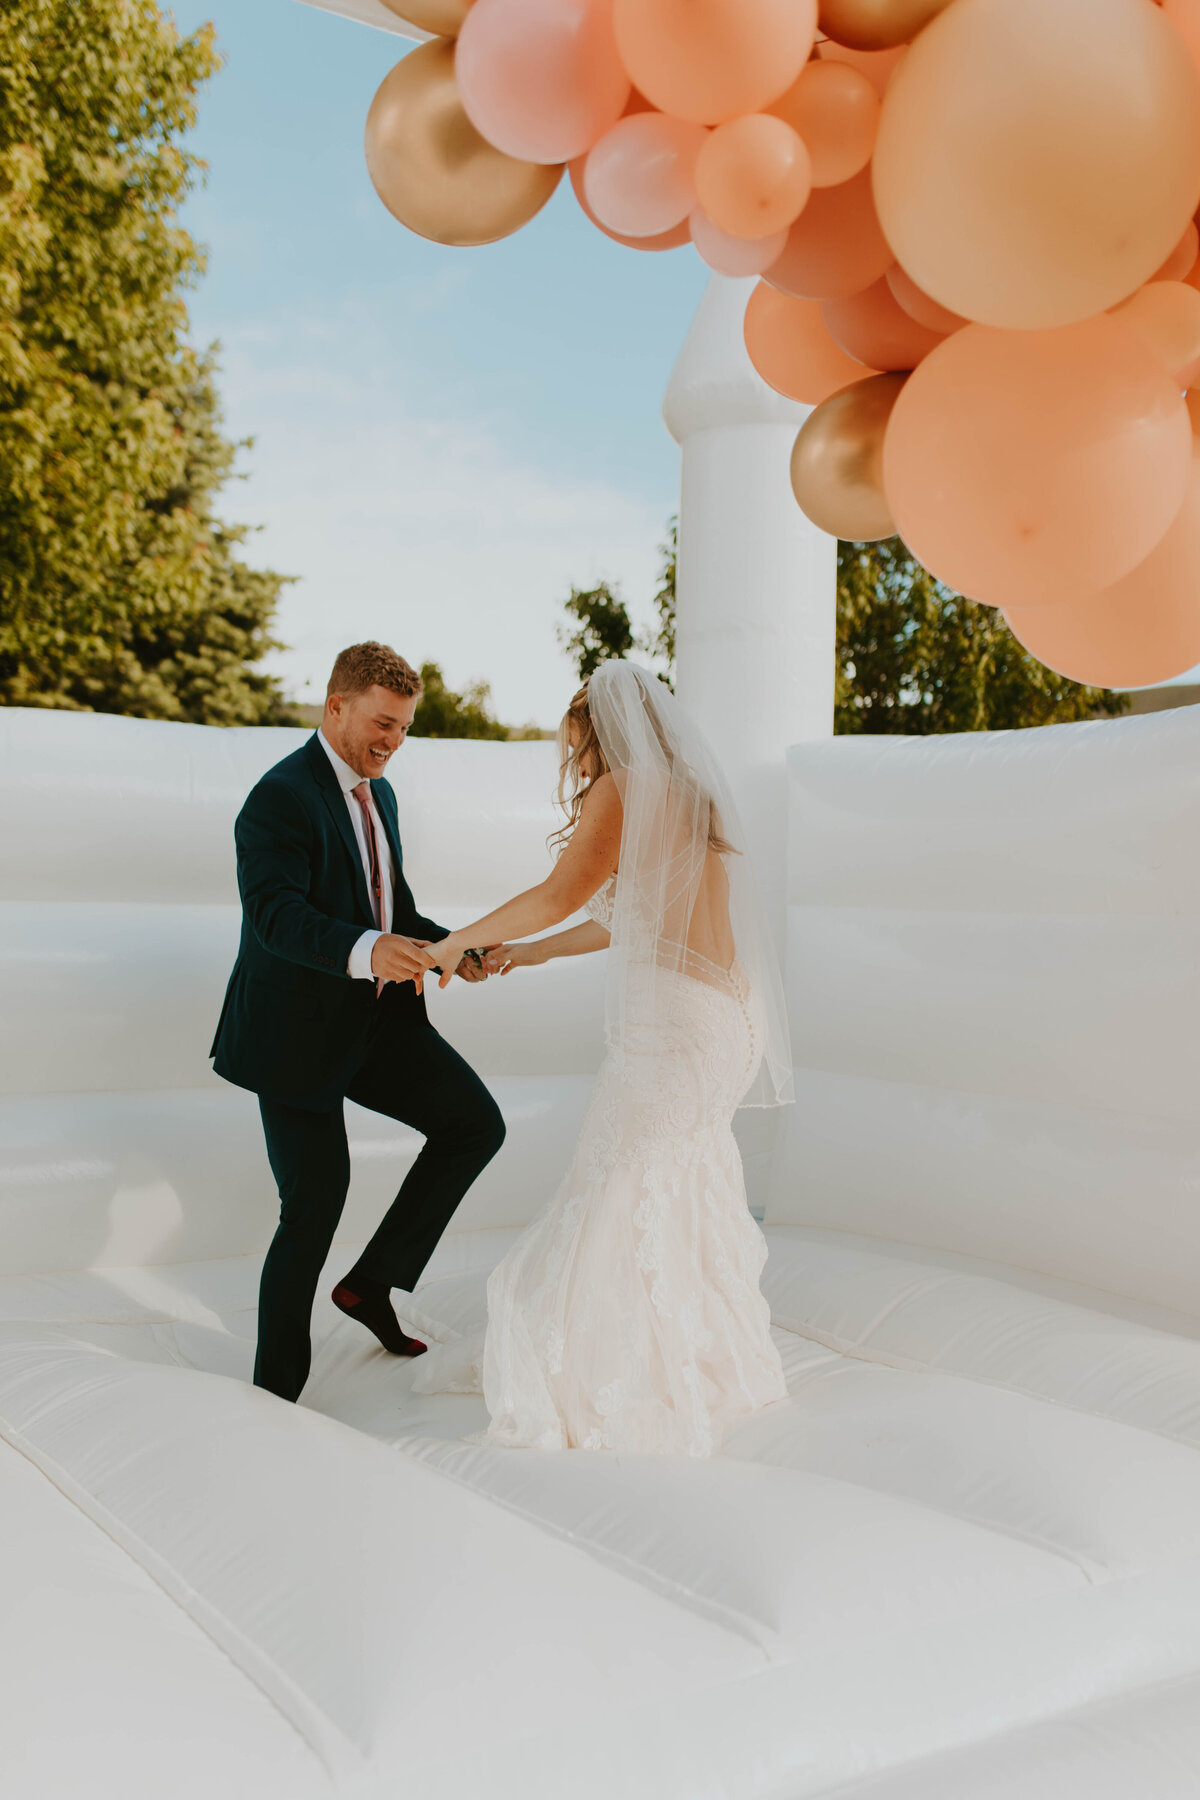 Bride and groom jumping in a white bouncy house.